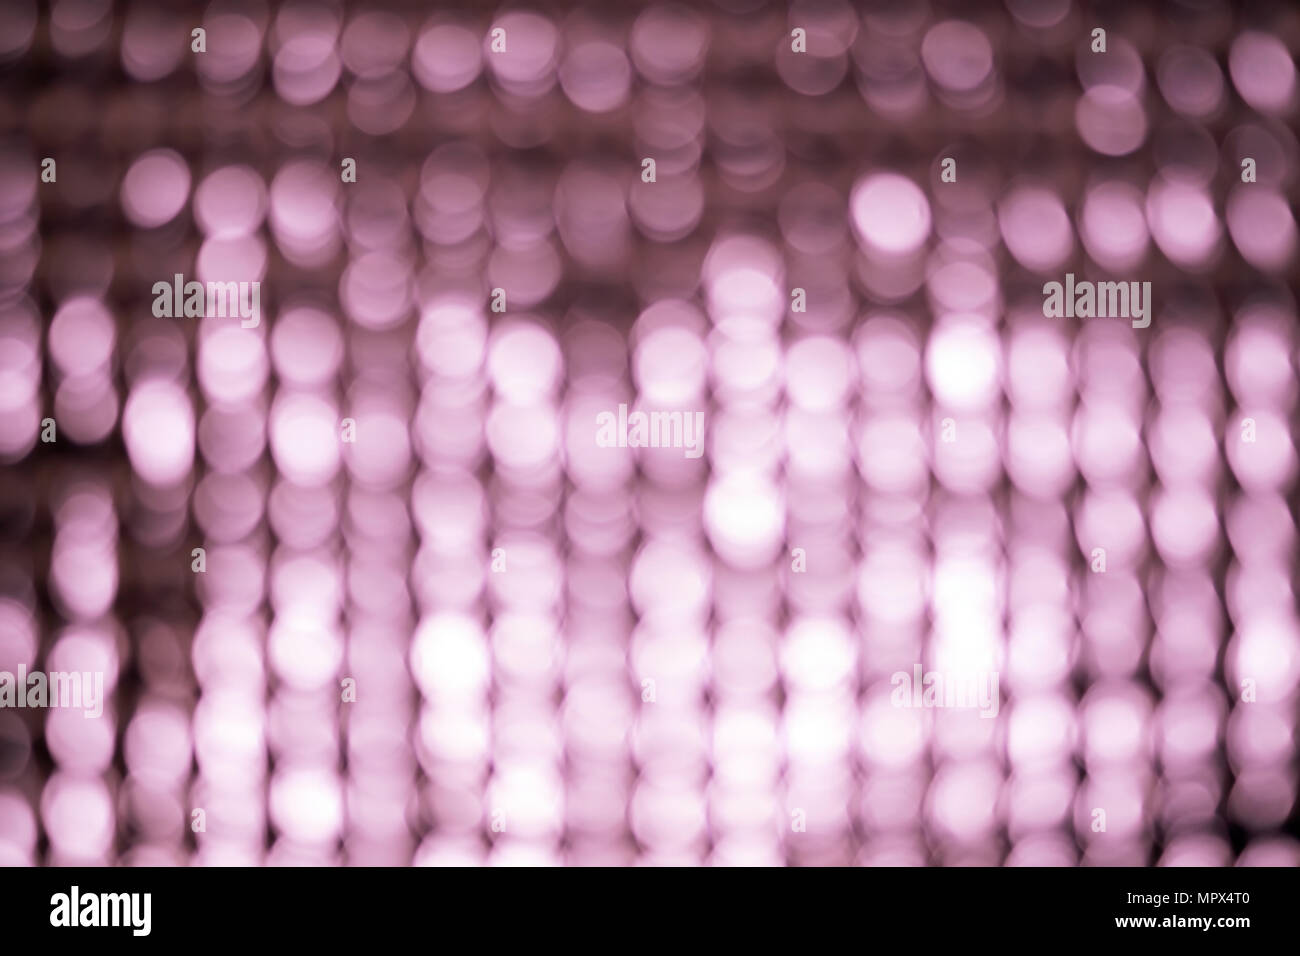 Abstract blur background of aluminum foil. Pink tone. Stock Photo